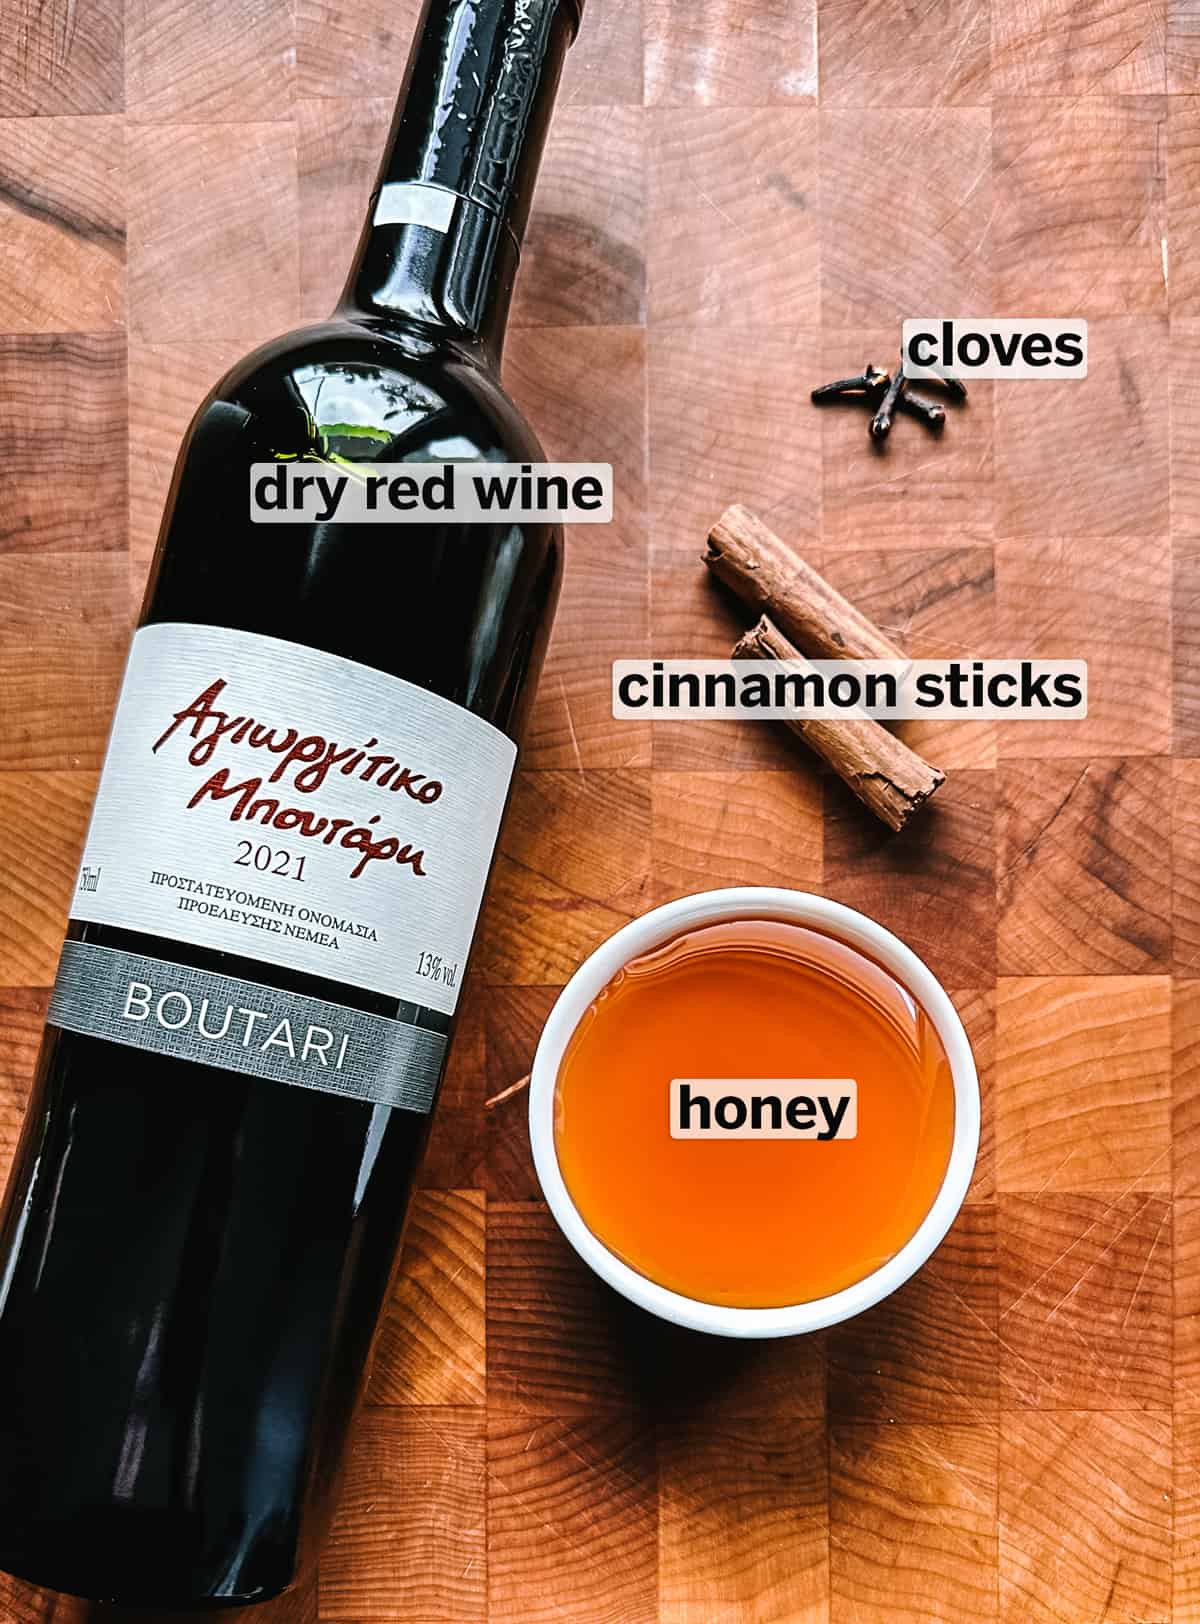 A bottle of red wine, a bowl with honey , cinnamon sticks and cloves on a wooden surface.